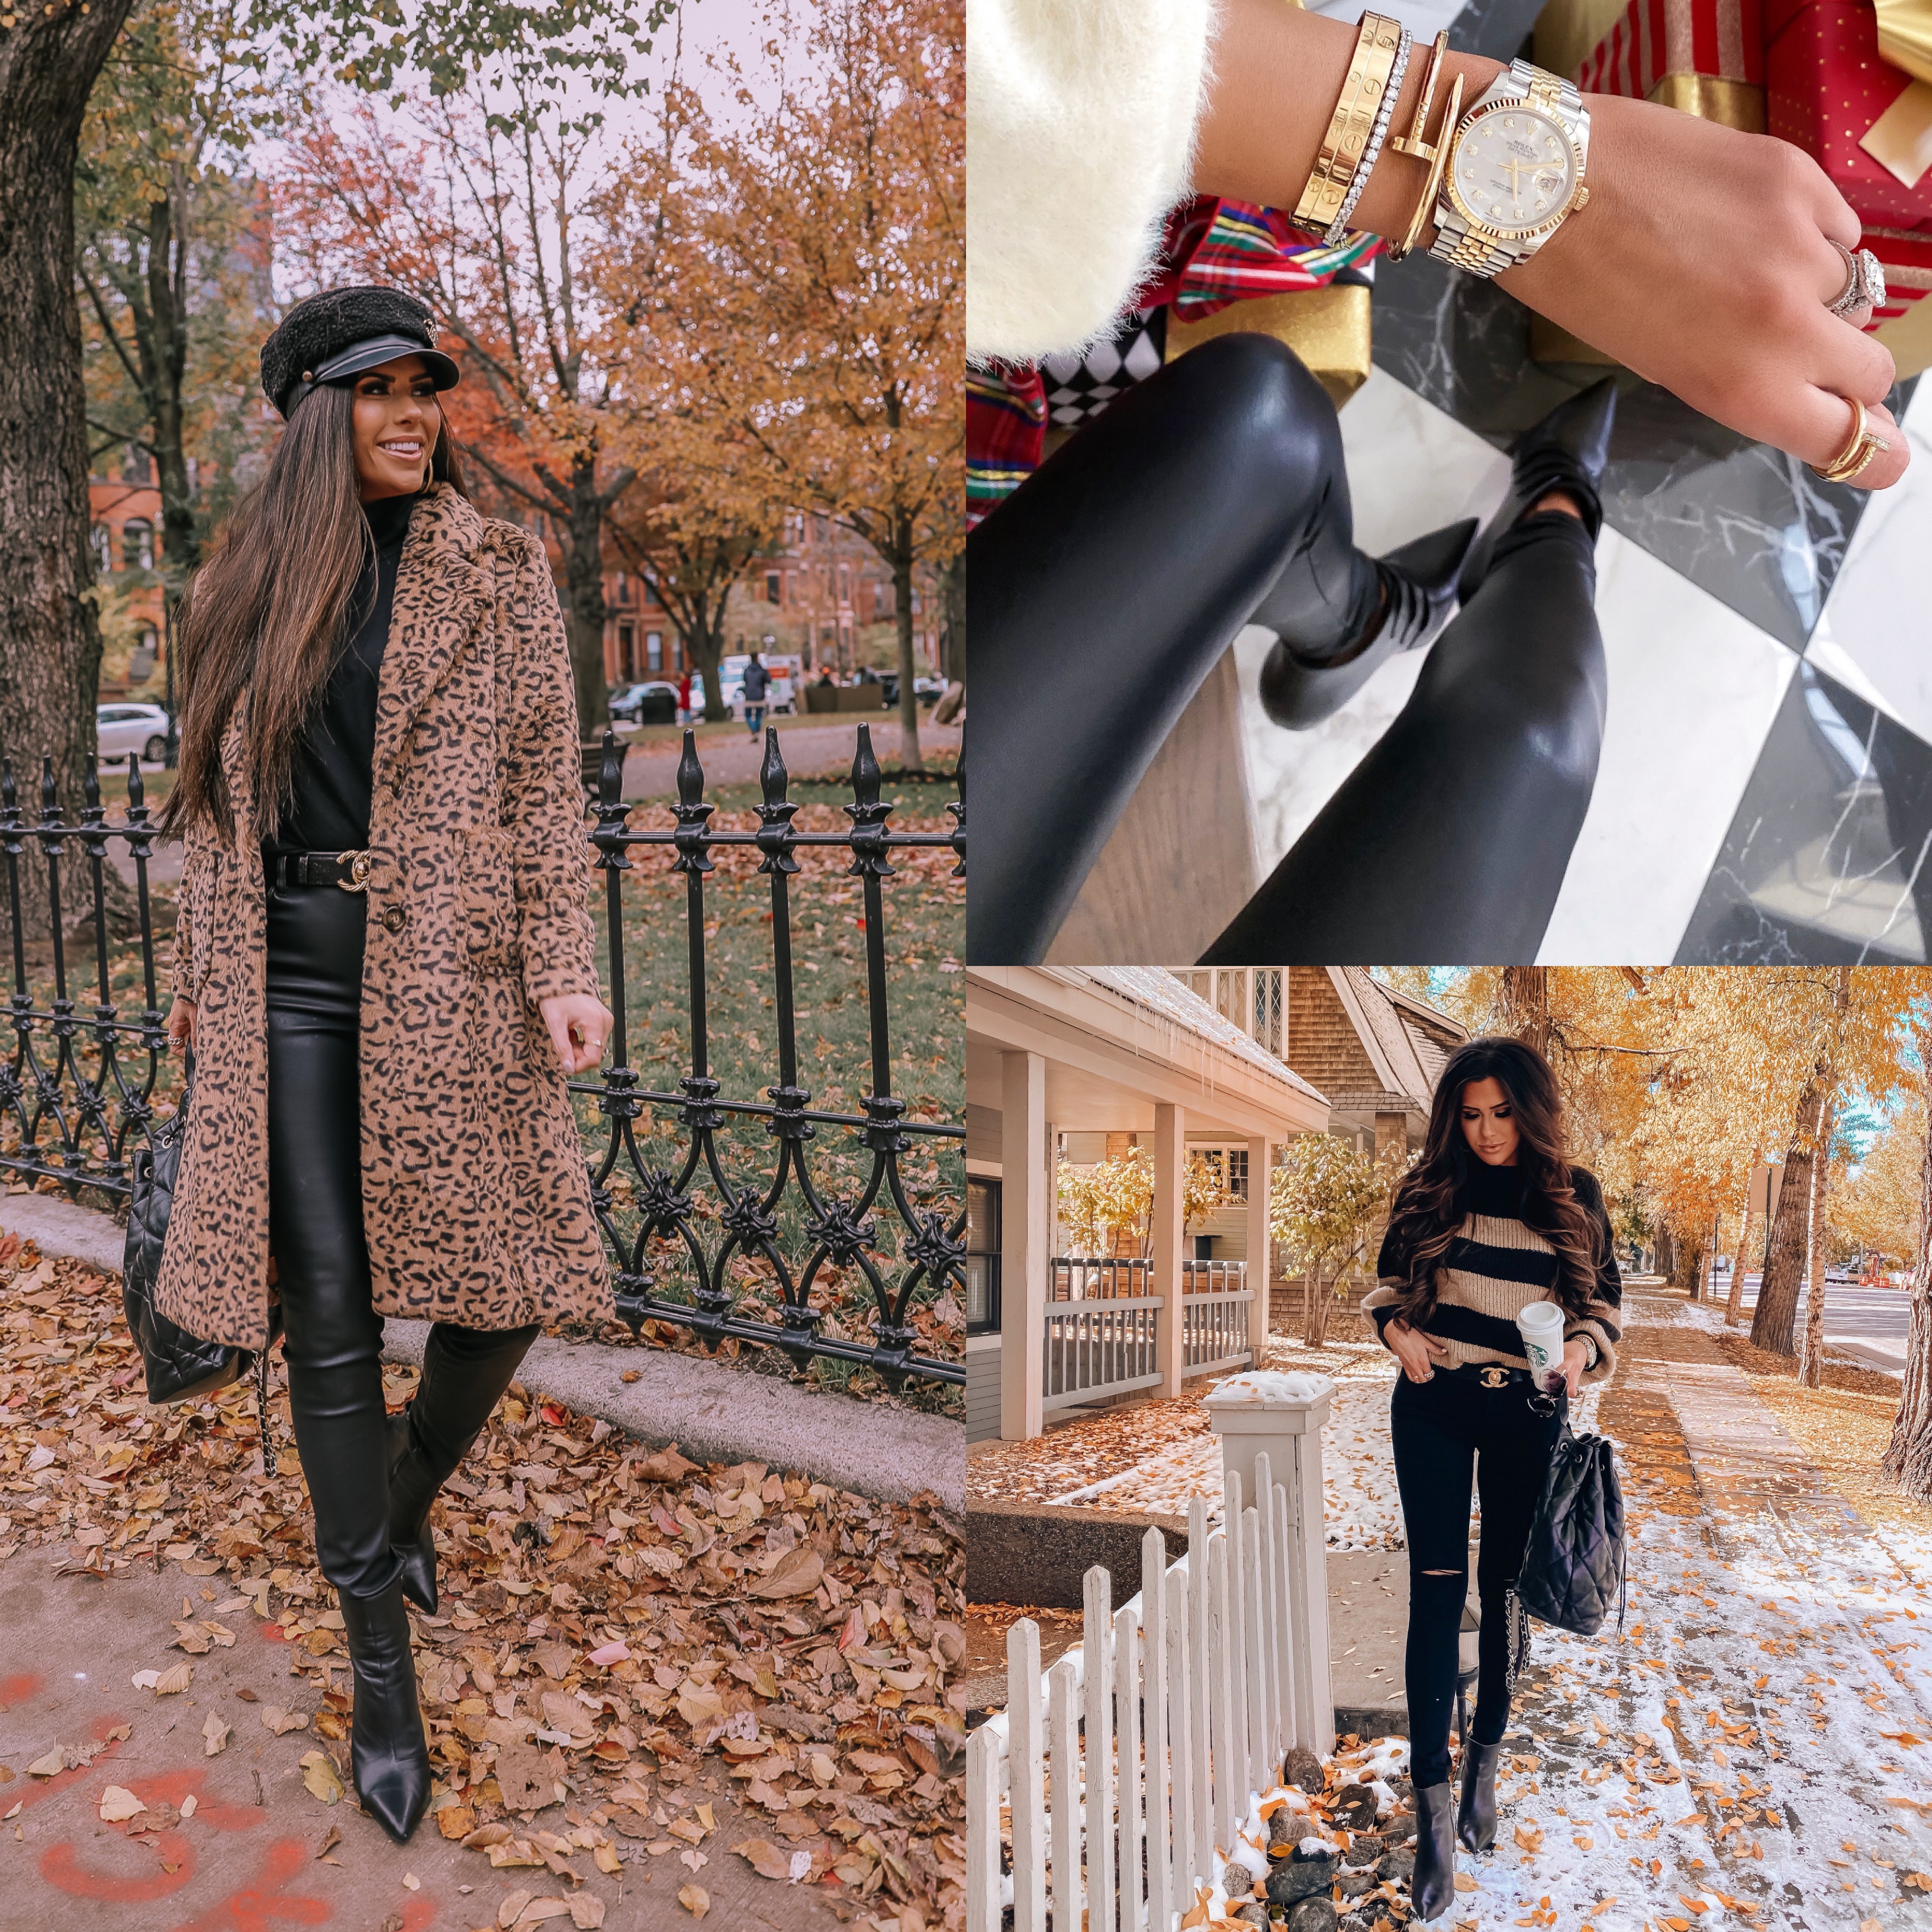 best of black faux leather pants 2019, best faux leather pants | best athletic leggings lululemon, zella, spanx review | Best Wardrobe Essentials 2019👖 | Part 2 by popular US fashion blog, The Sweetest Thing: collage image of a woman wearing Nordstrom Perfect Control Faux Leather Leggings COMMANDO and Nordstrom Faux Leather Button Front Pants BLANKNYC.